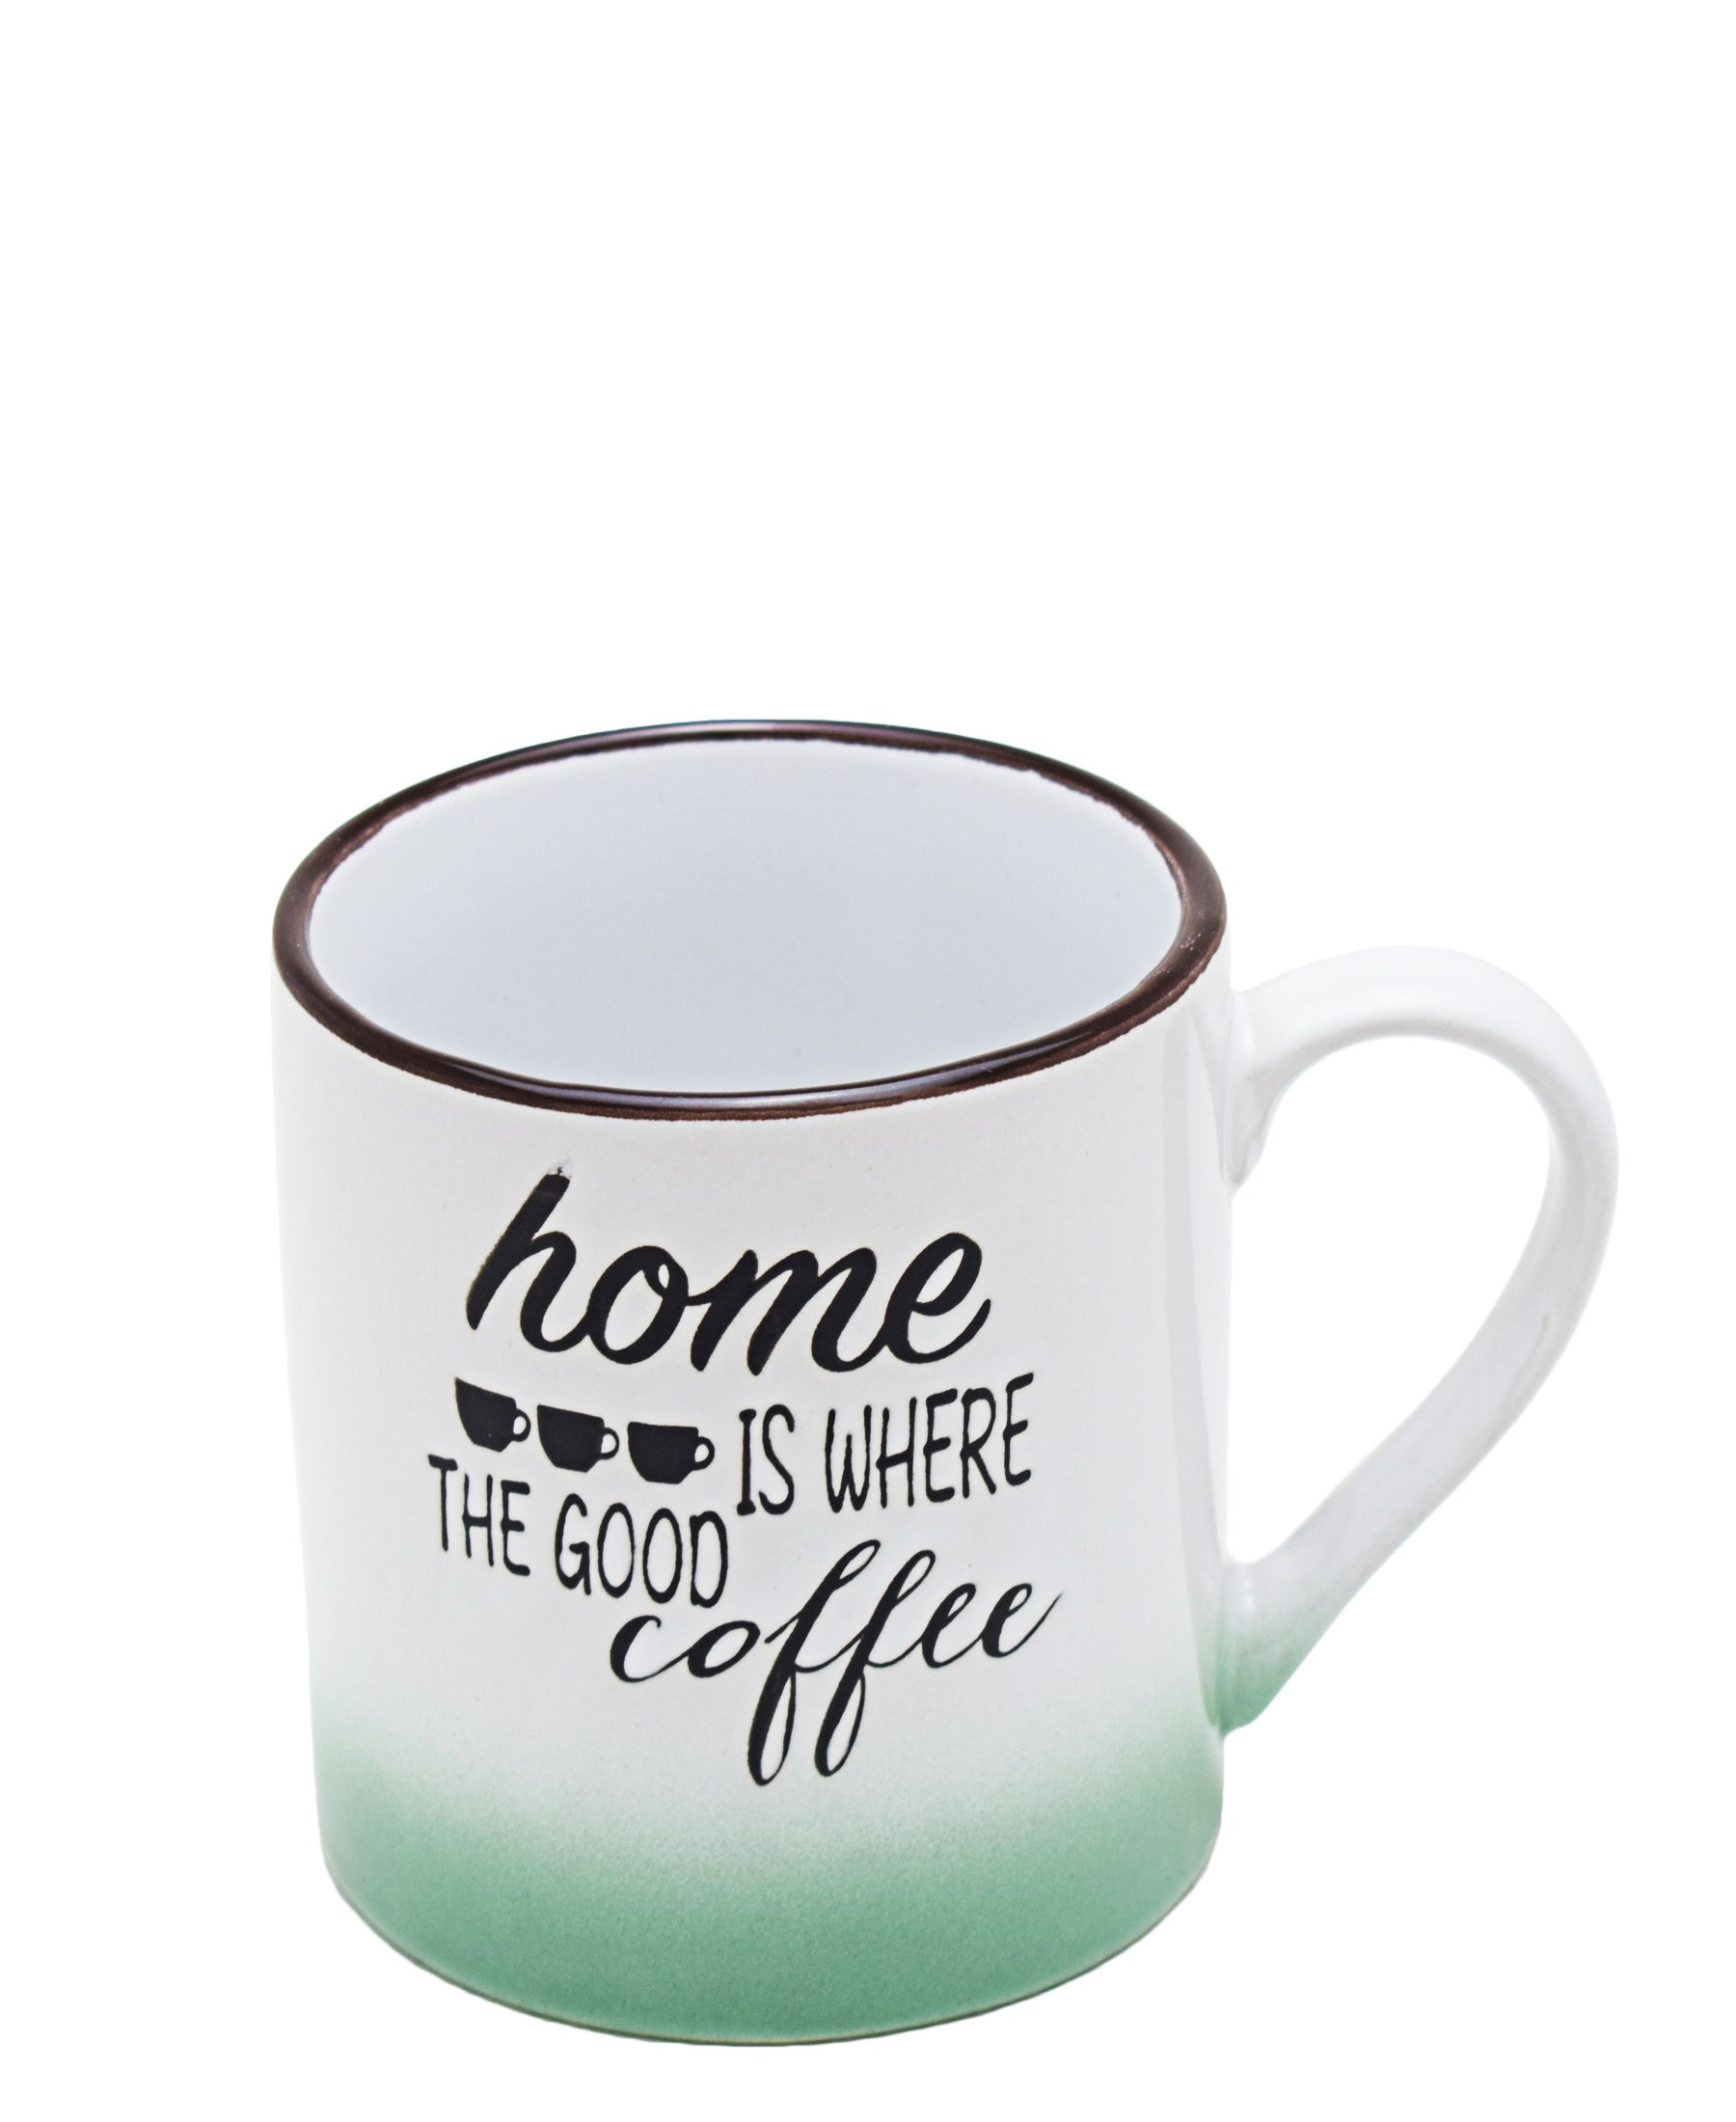 Kitchen Life Coffee Mug 400ml With Quote - White & Green